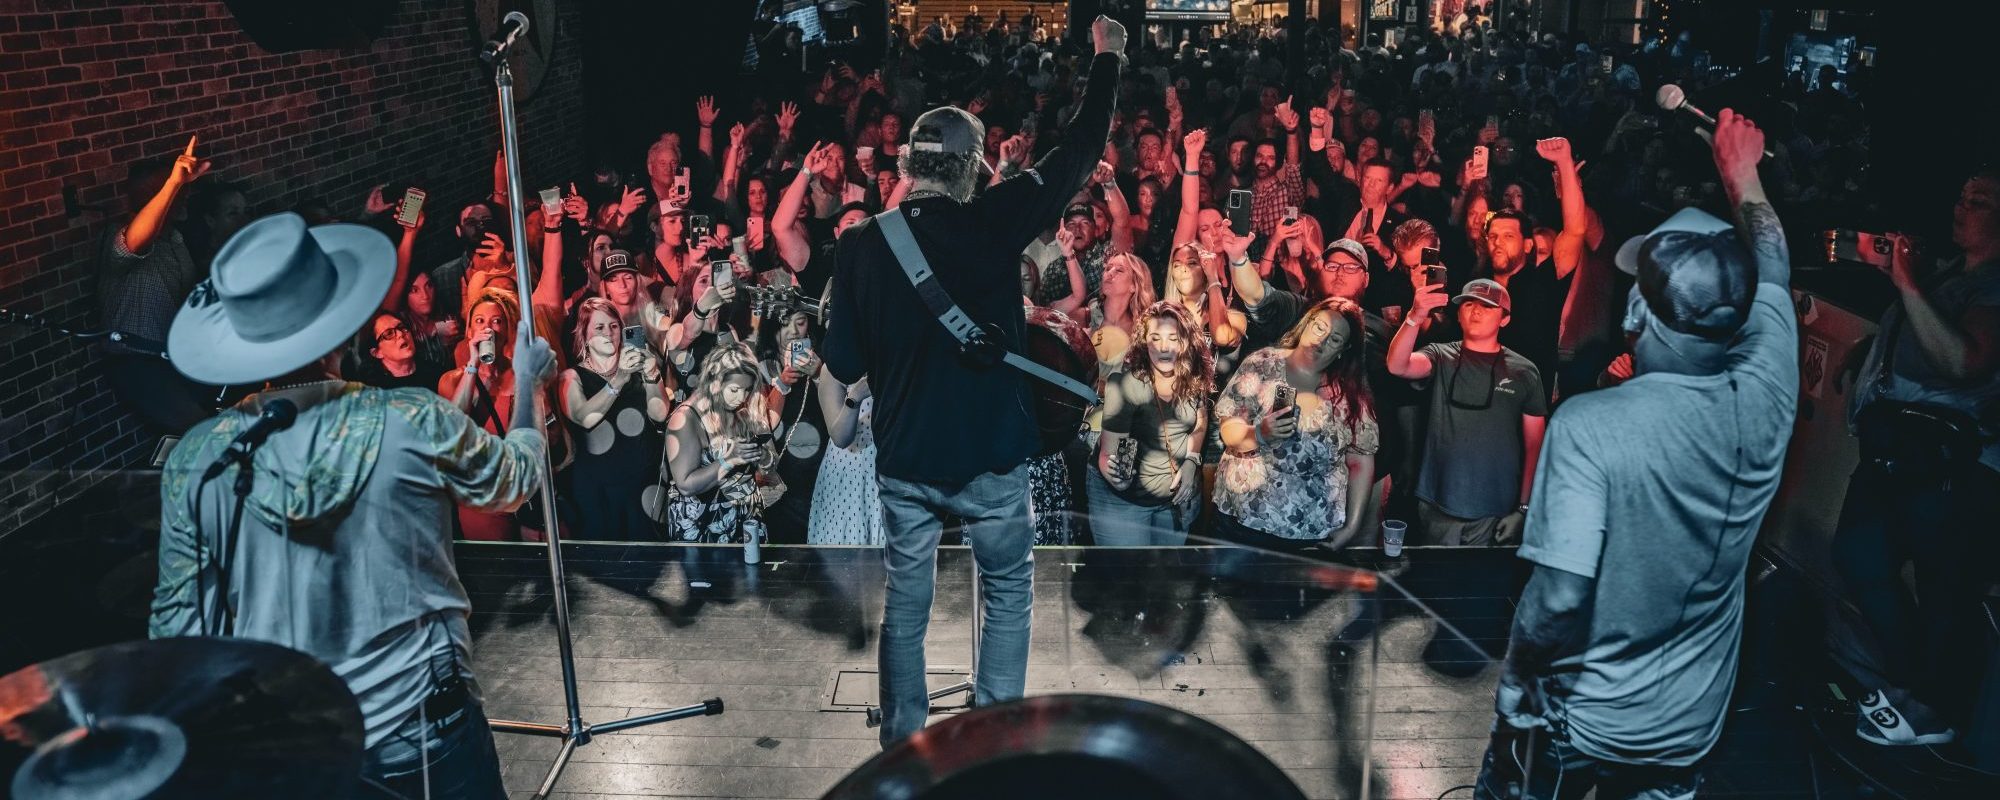 Toby Keith Guest Performs at Recent LOCASH Show